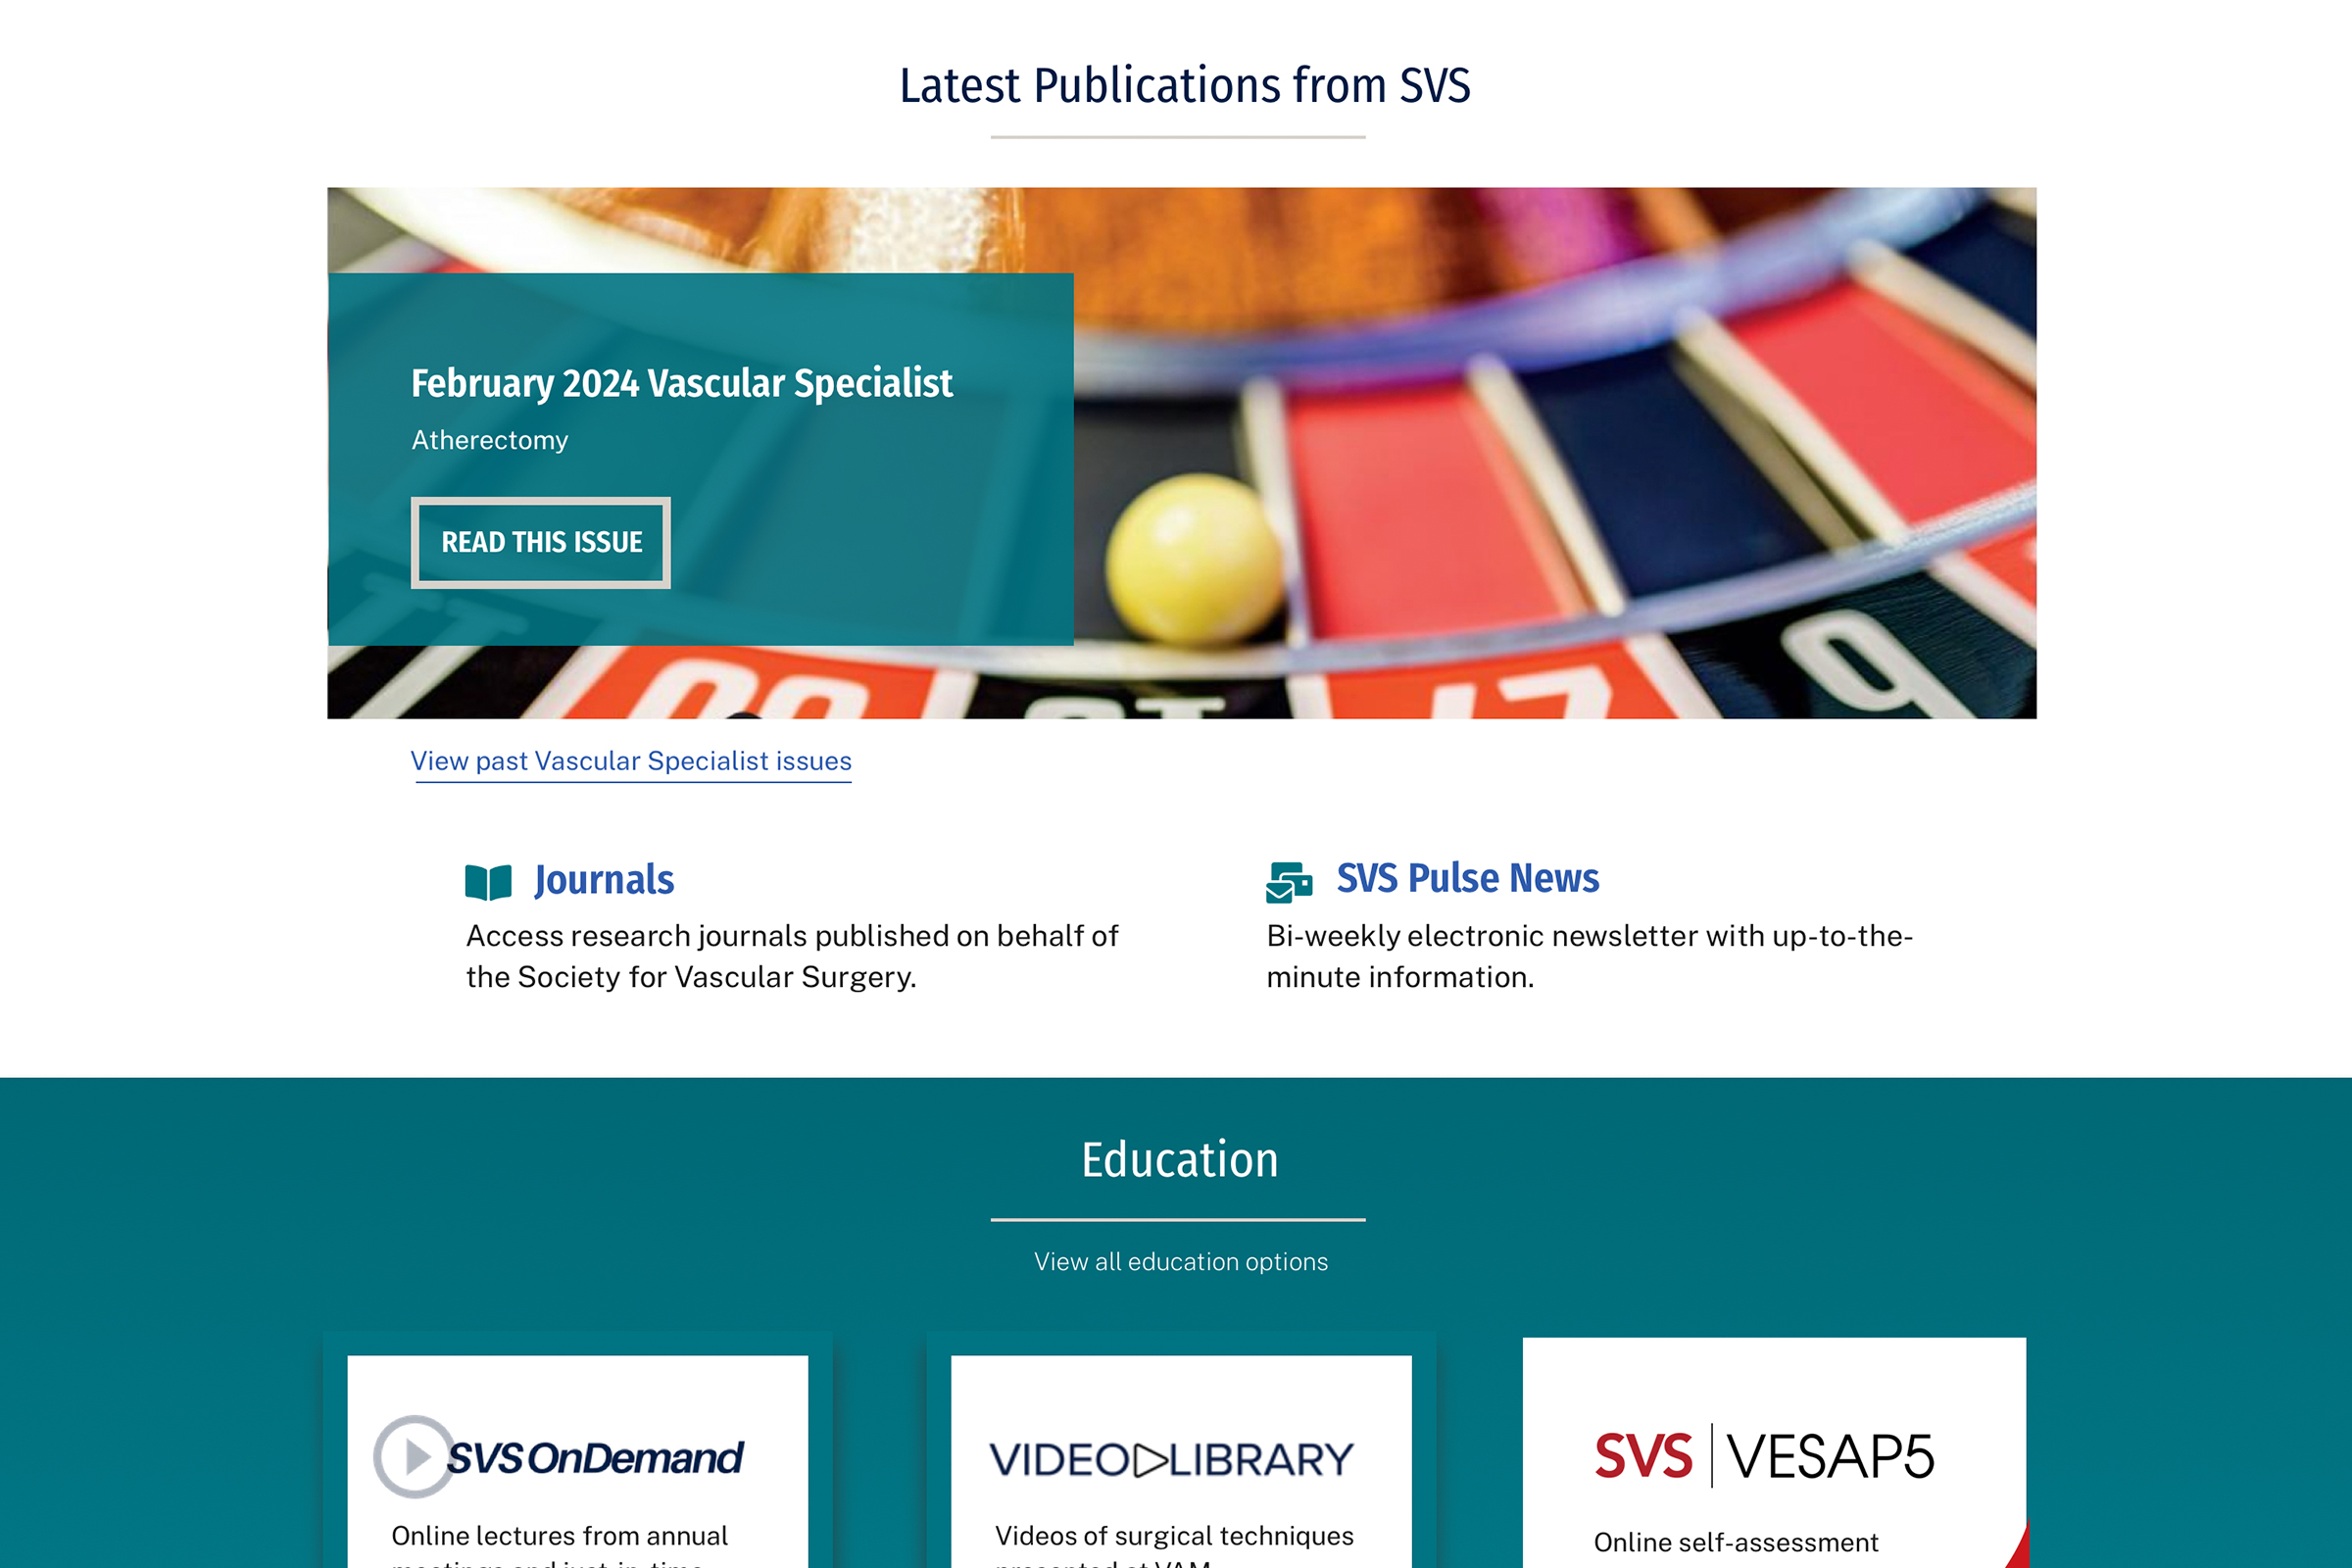 SVS homepage highlighting 3 journals and 3 othe rmember resources in a bold teal with graphic roulette wheel background